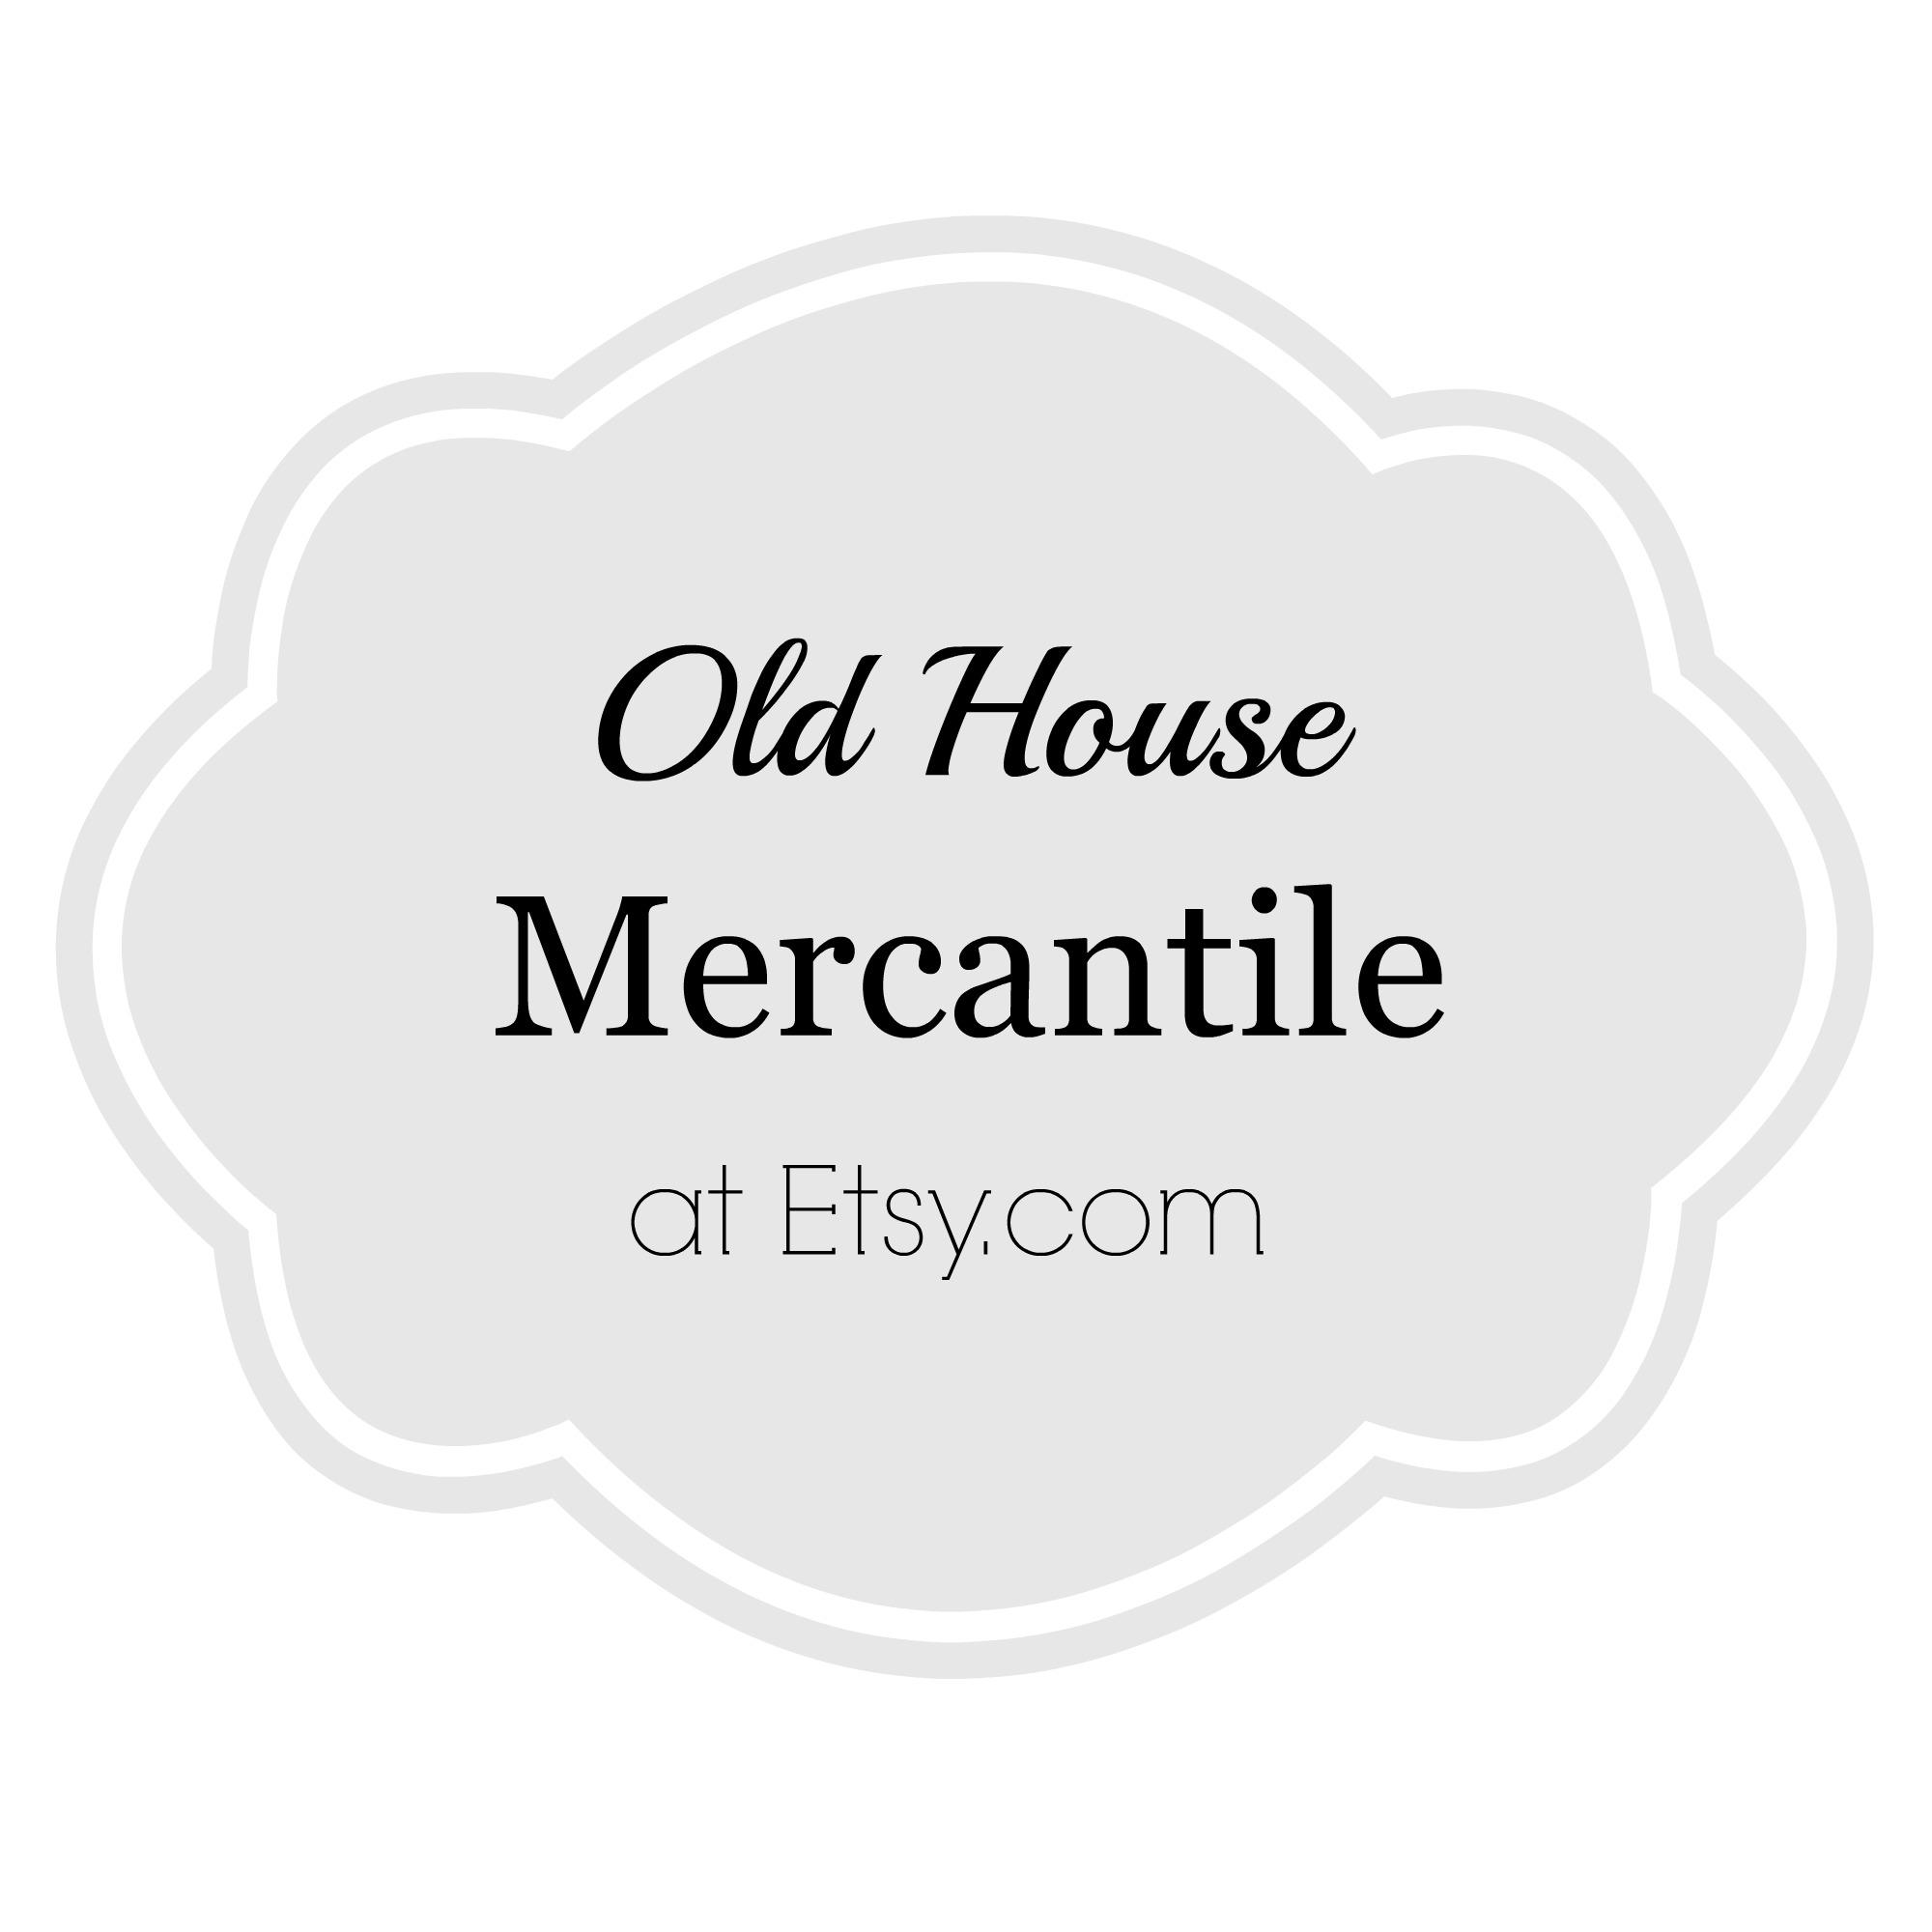 Old House Mercantile